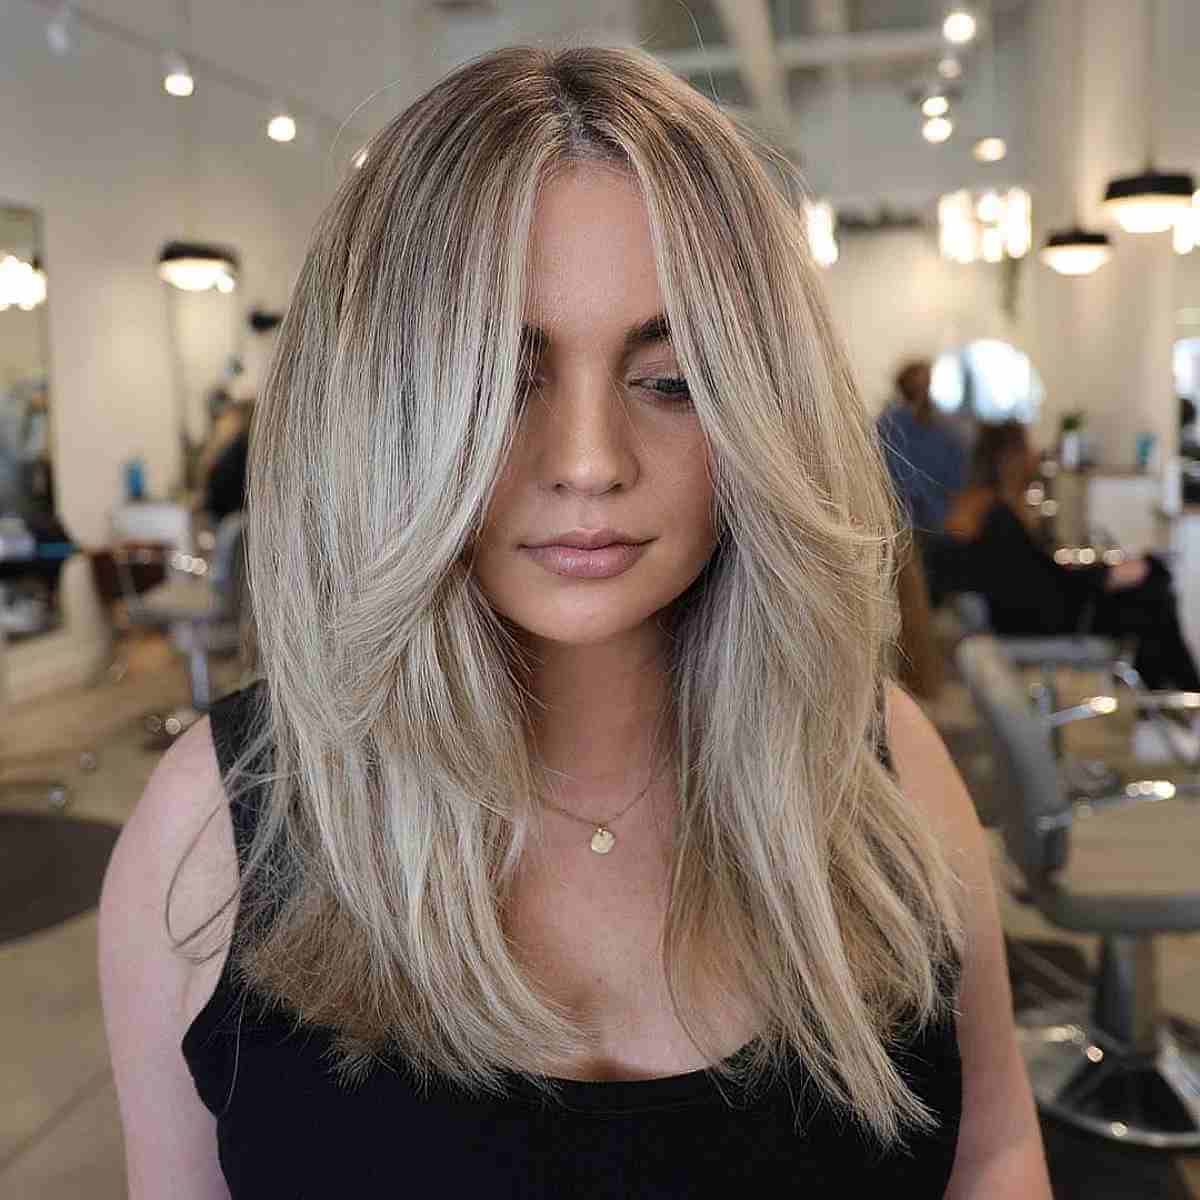 43 Flattering Middle Part Hairstyles Trending Right Now Throughout Current Middle Parted Medium Length Hairstyles (View 4 of 25)